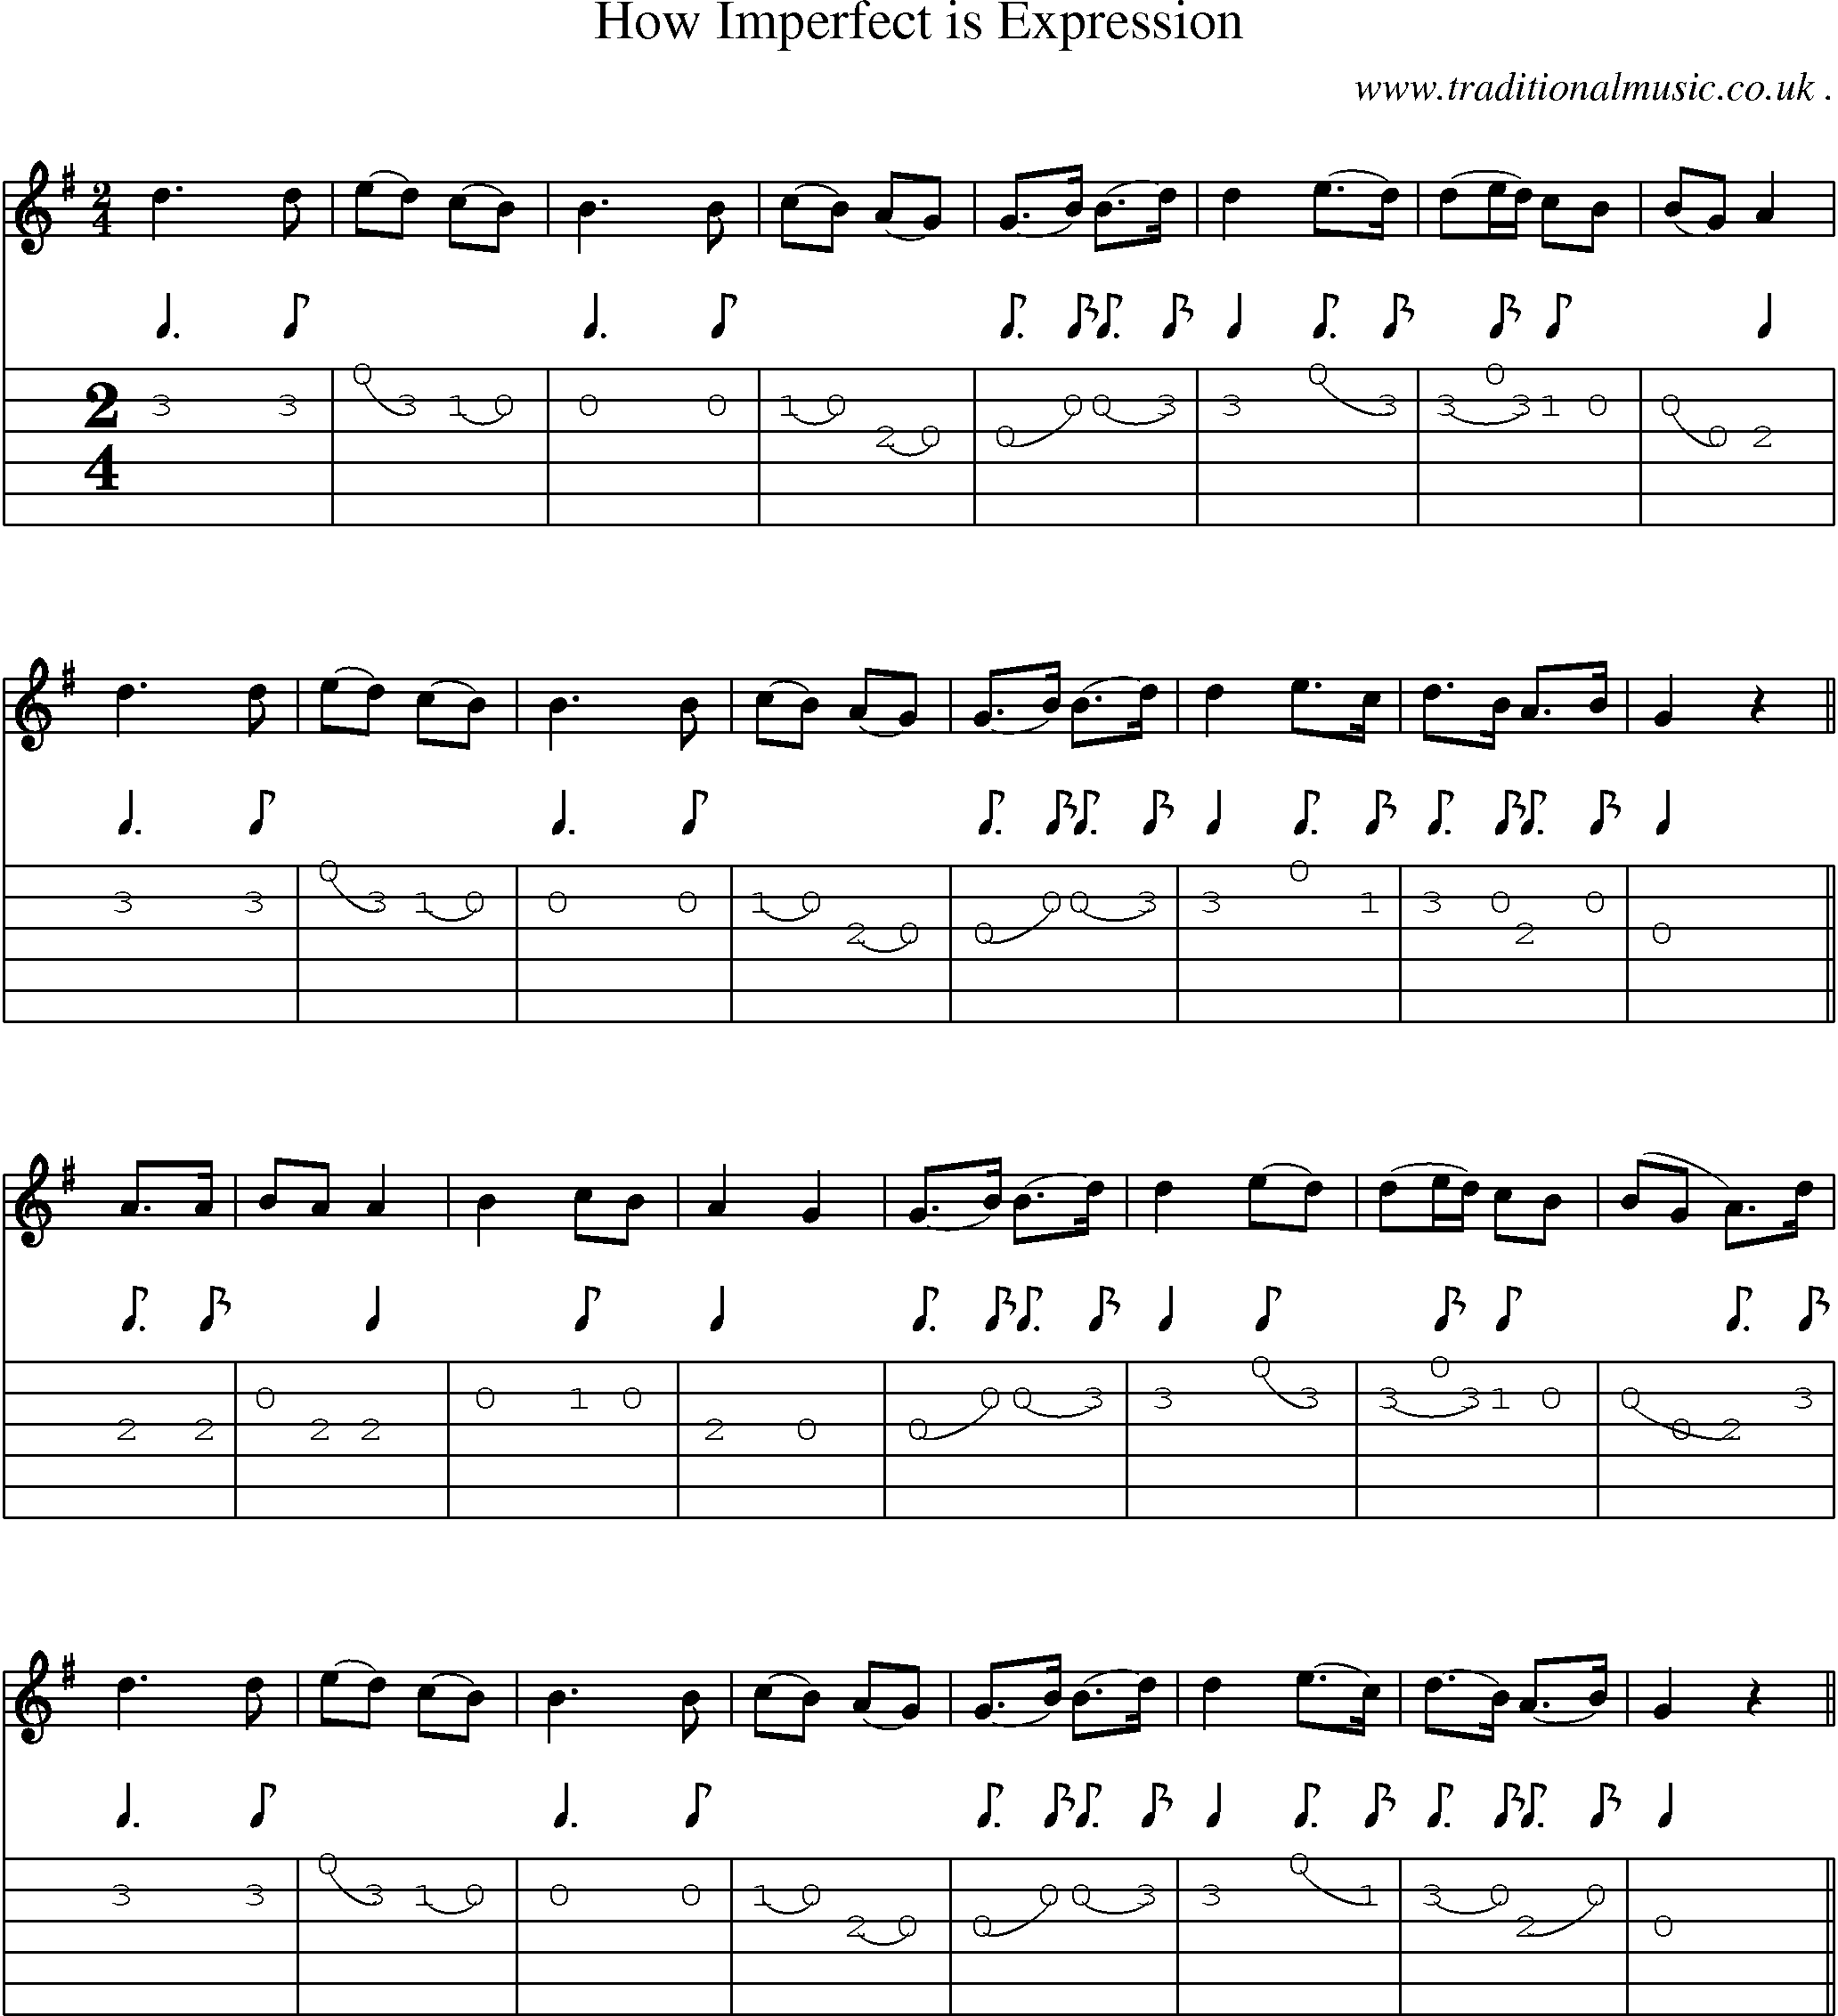 Sheet-Music and Guitar Tabs for How Imperfect Is Expression